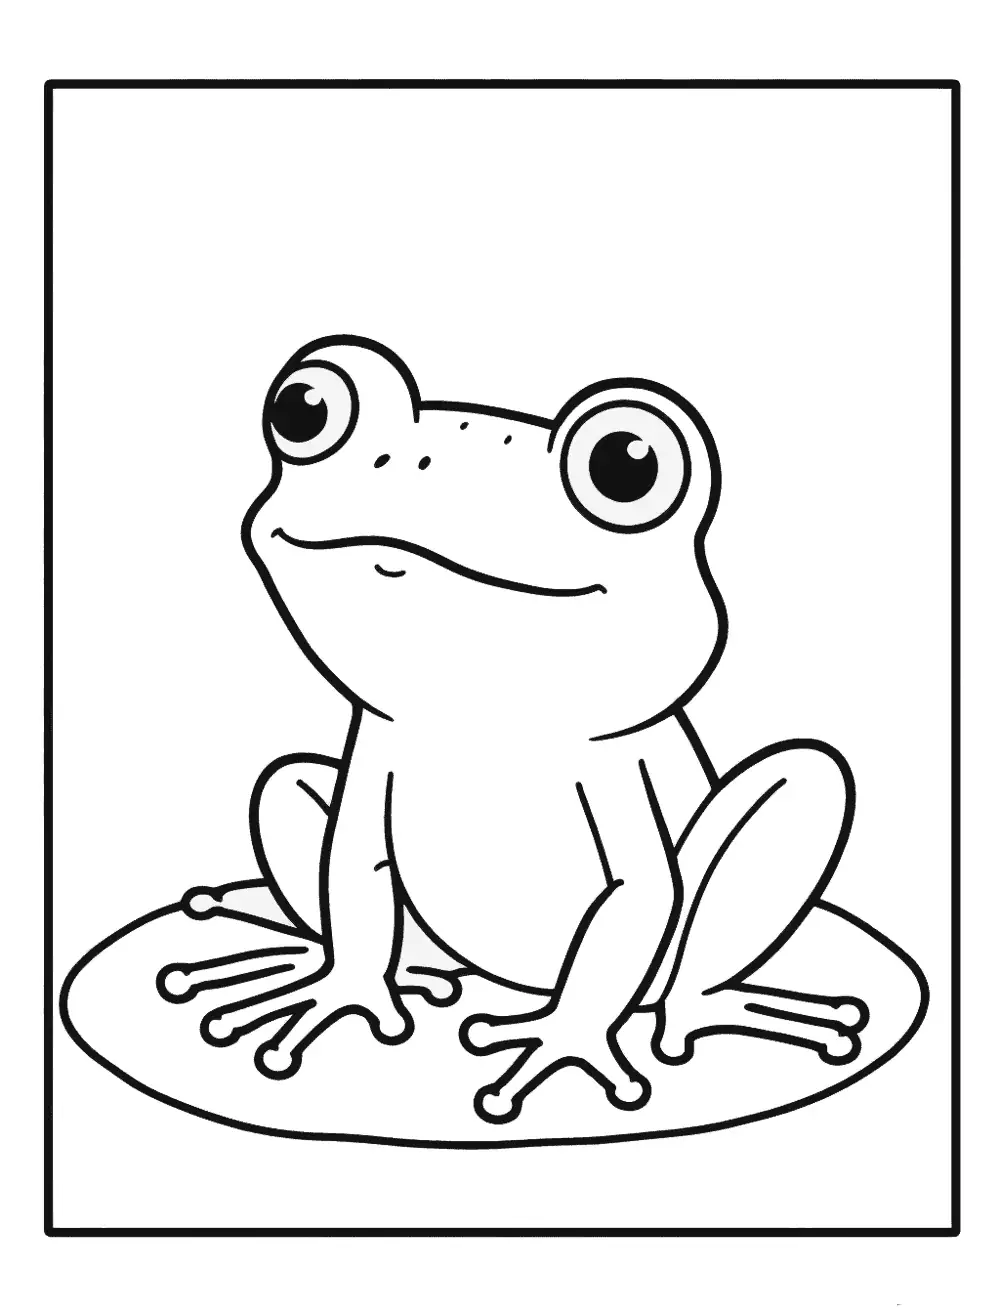 Easy Frog Coloring Page - A simple, easy-to-color frog for young kids